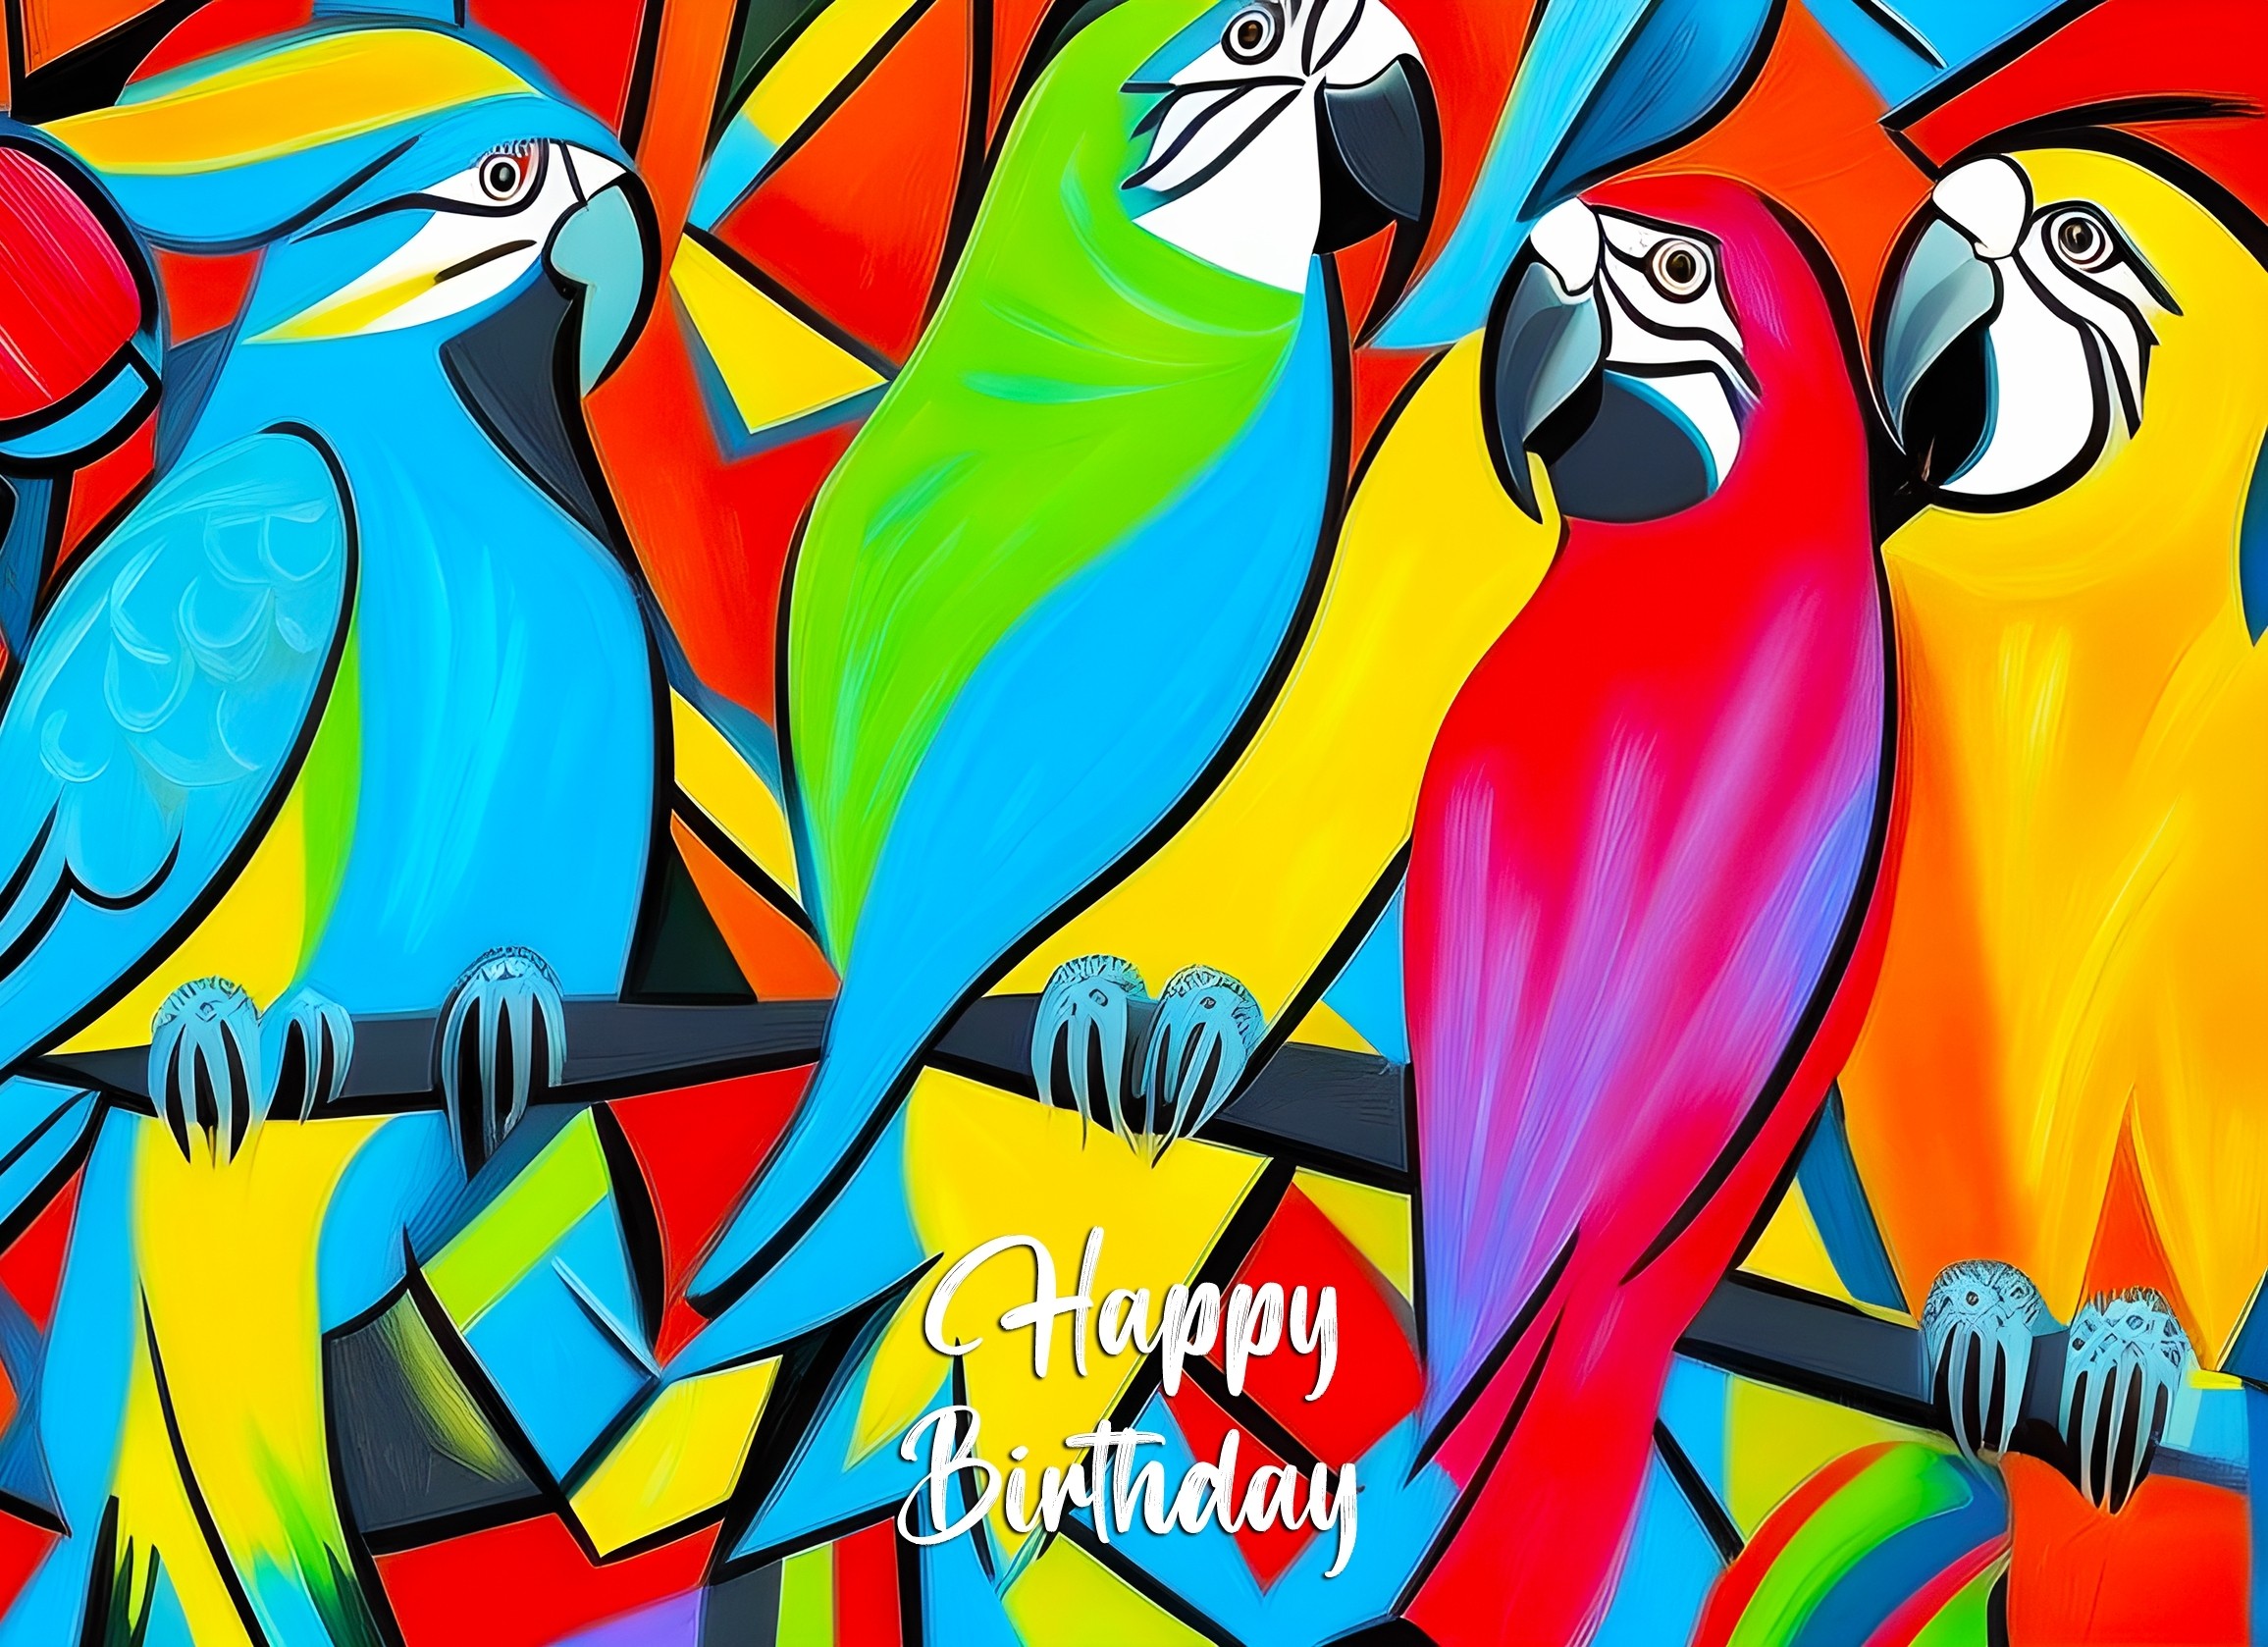 Parrot Animal Colourful Abstract Art Birthday Card